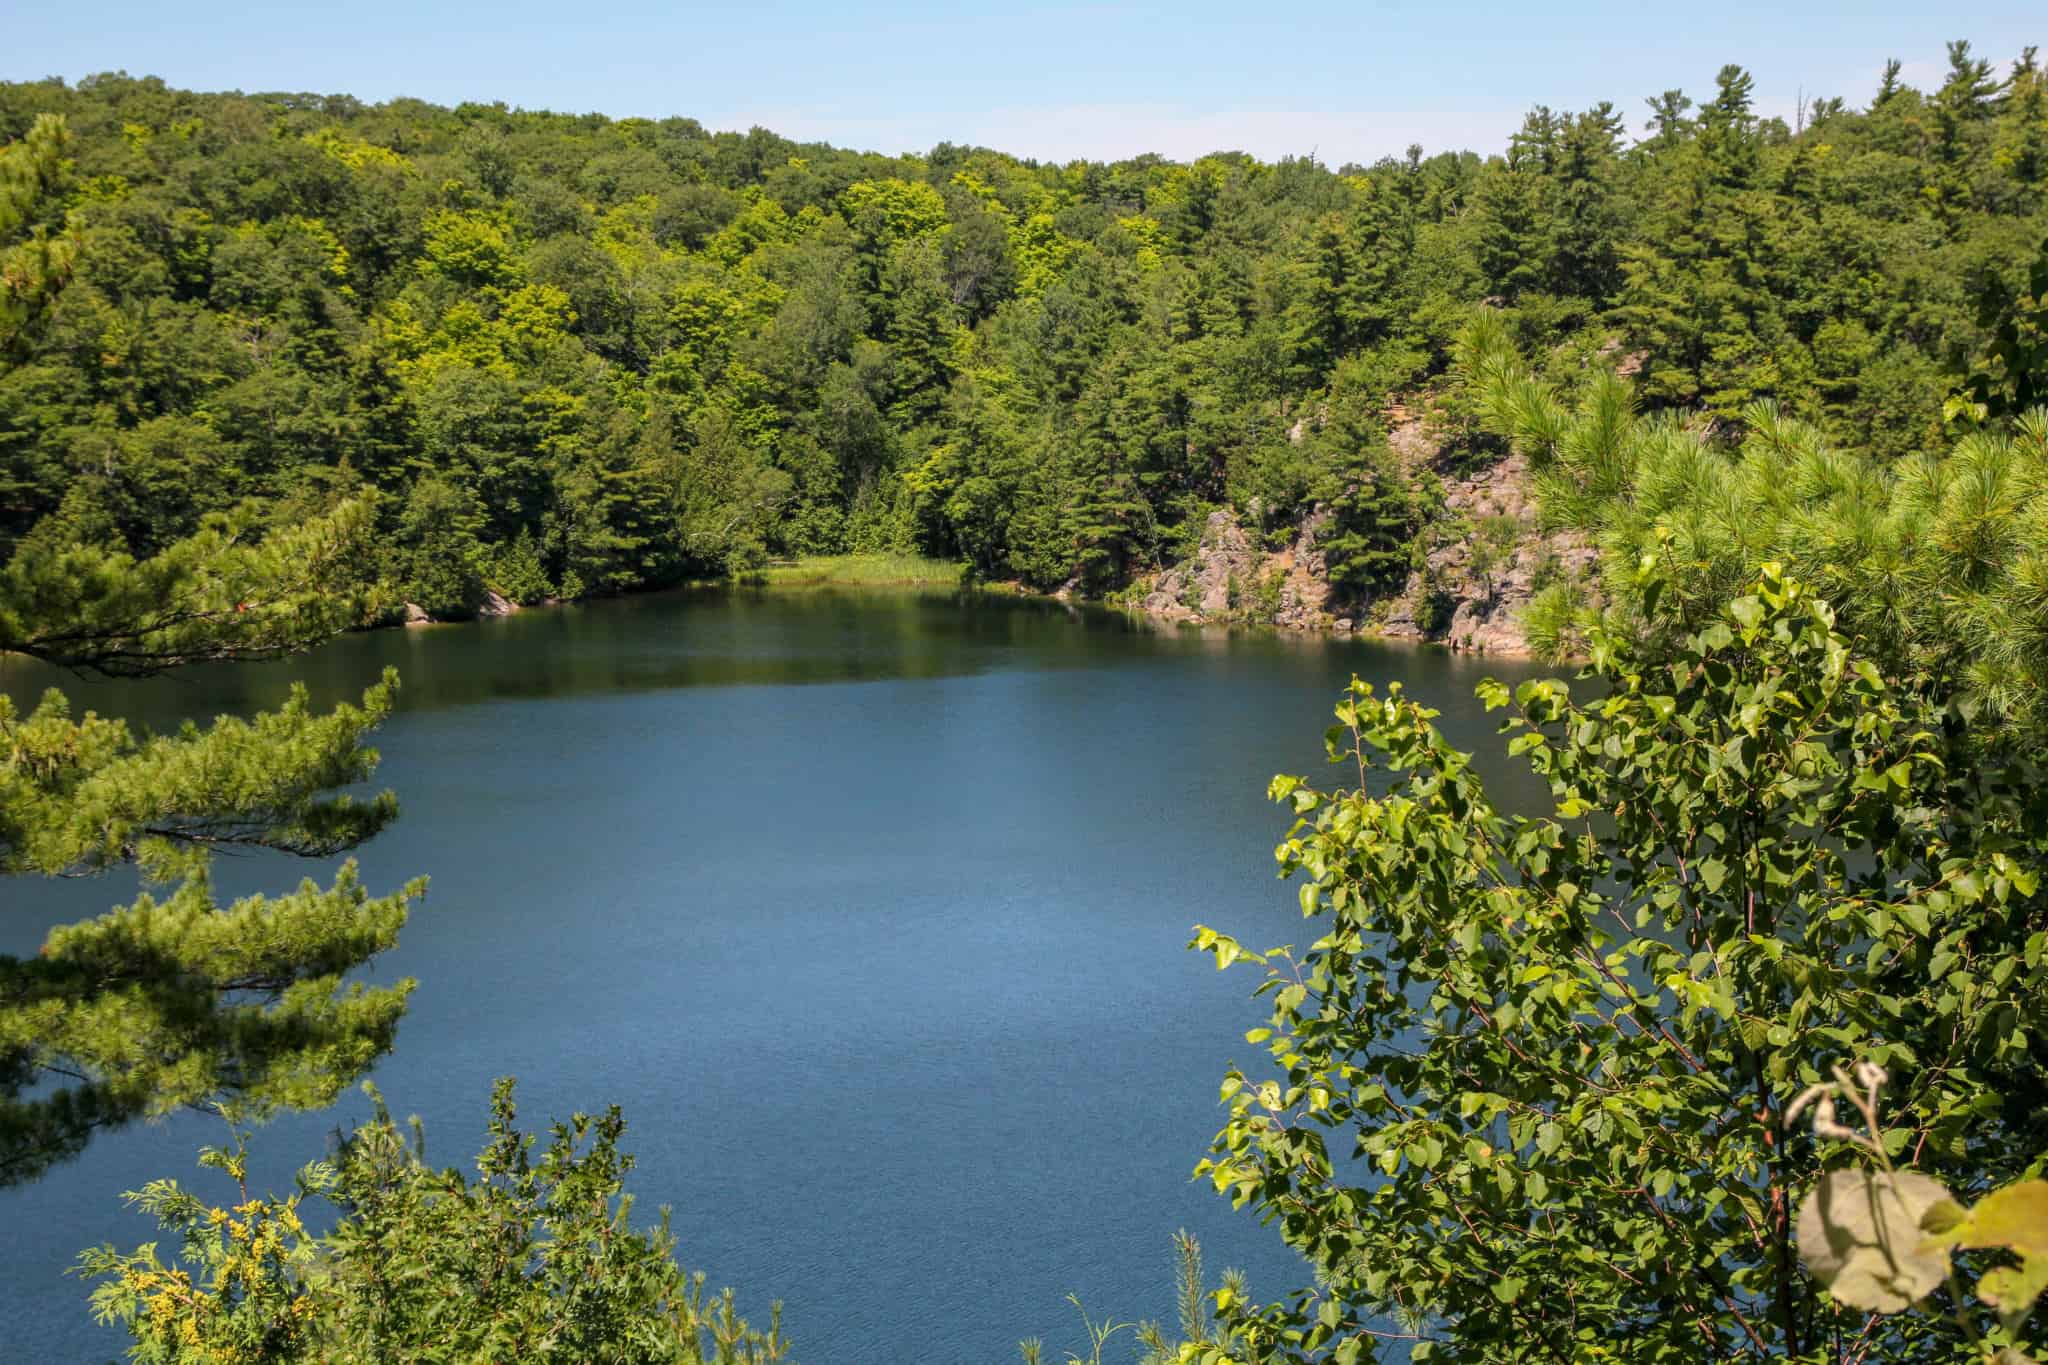 Hiking Gatineau Park is one of the things to do in Ottawa